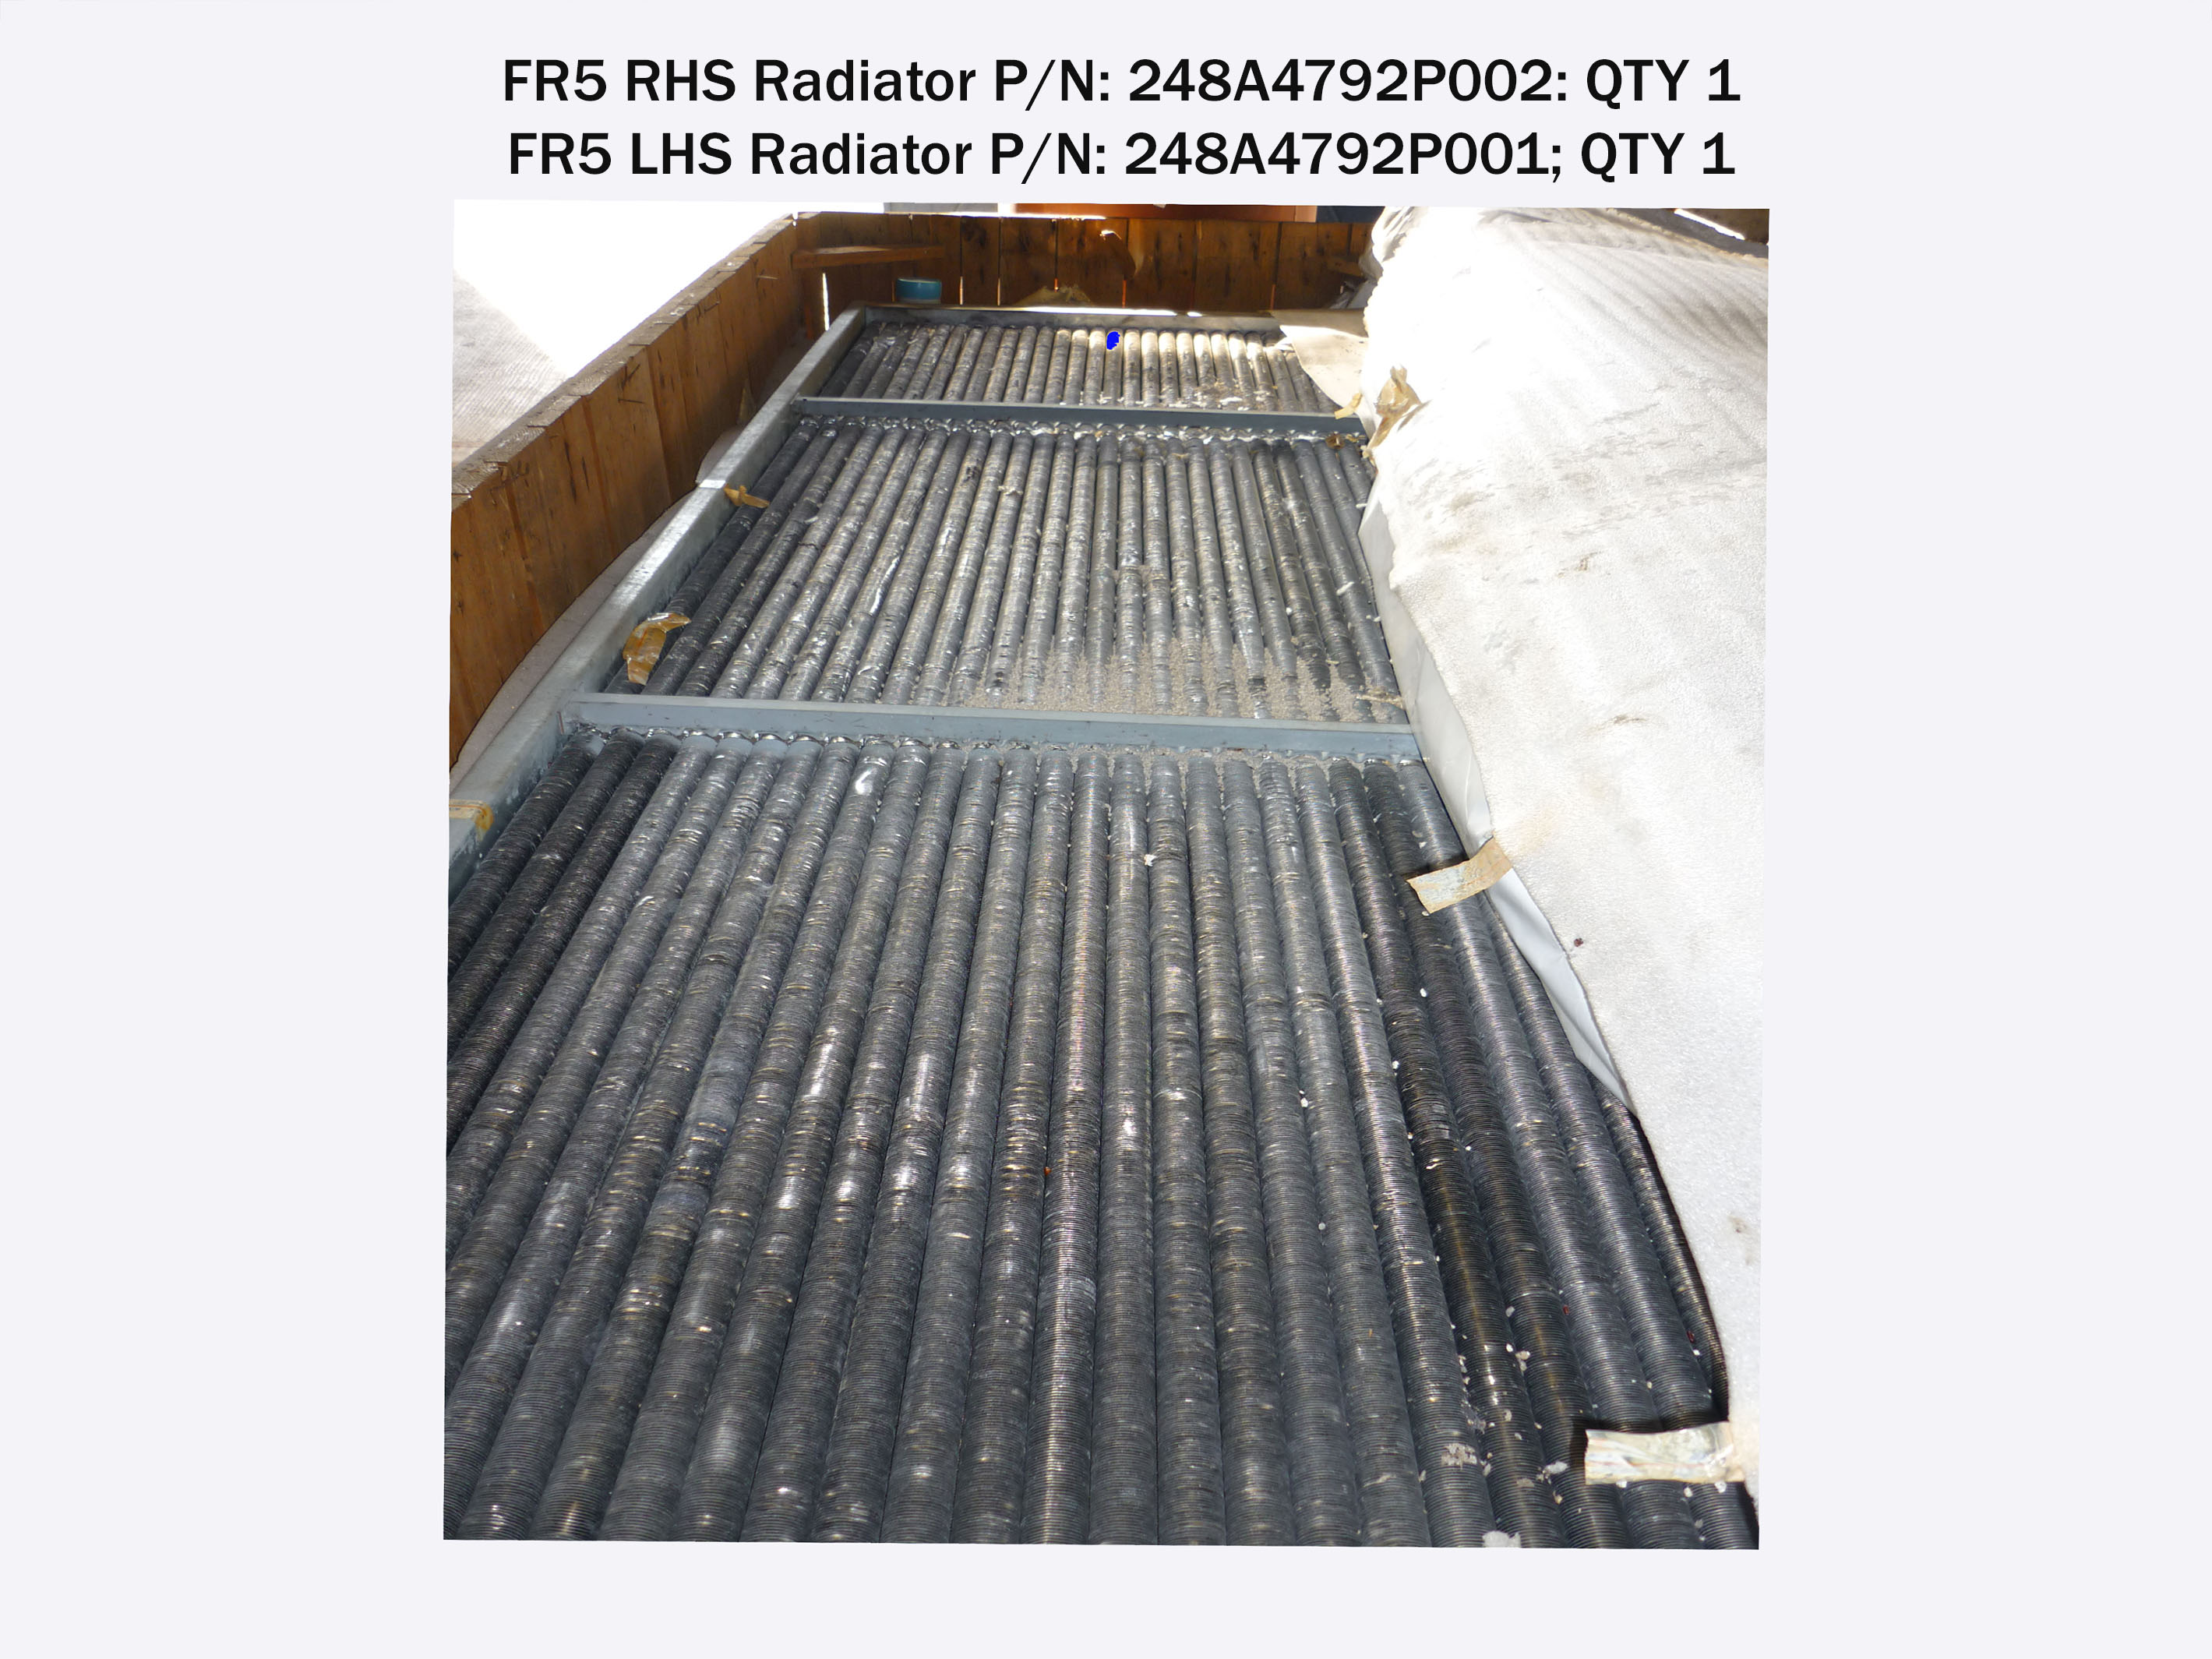 Radiator for FR5P (MS5001P) QTY 2